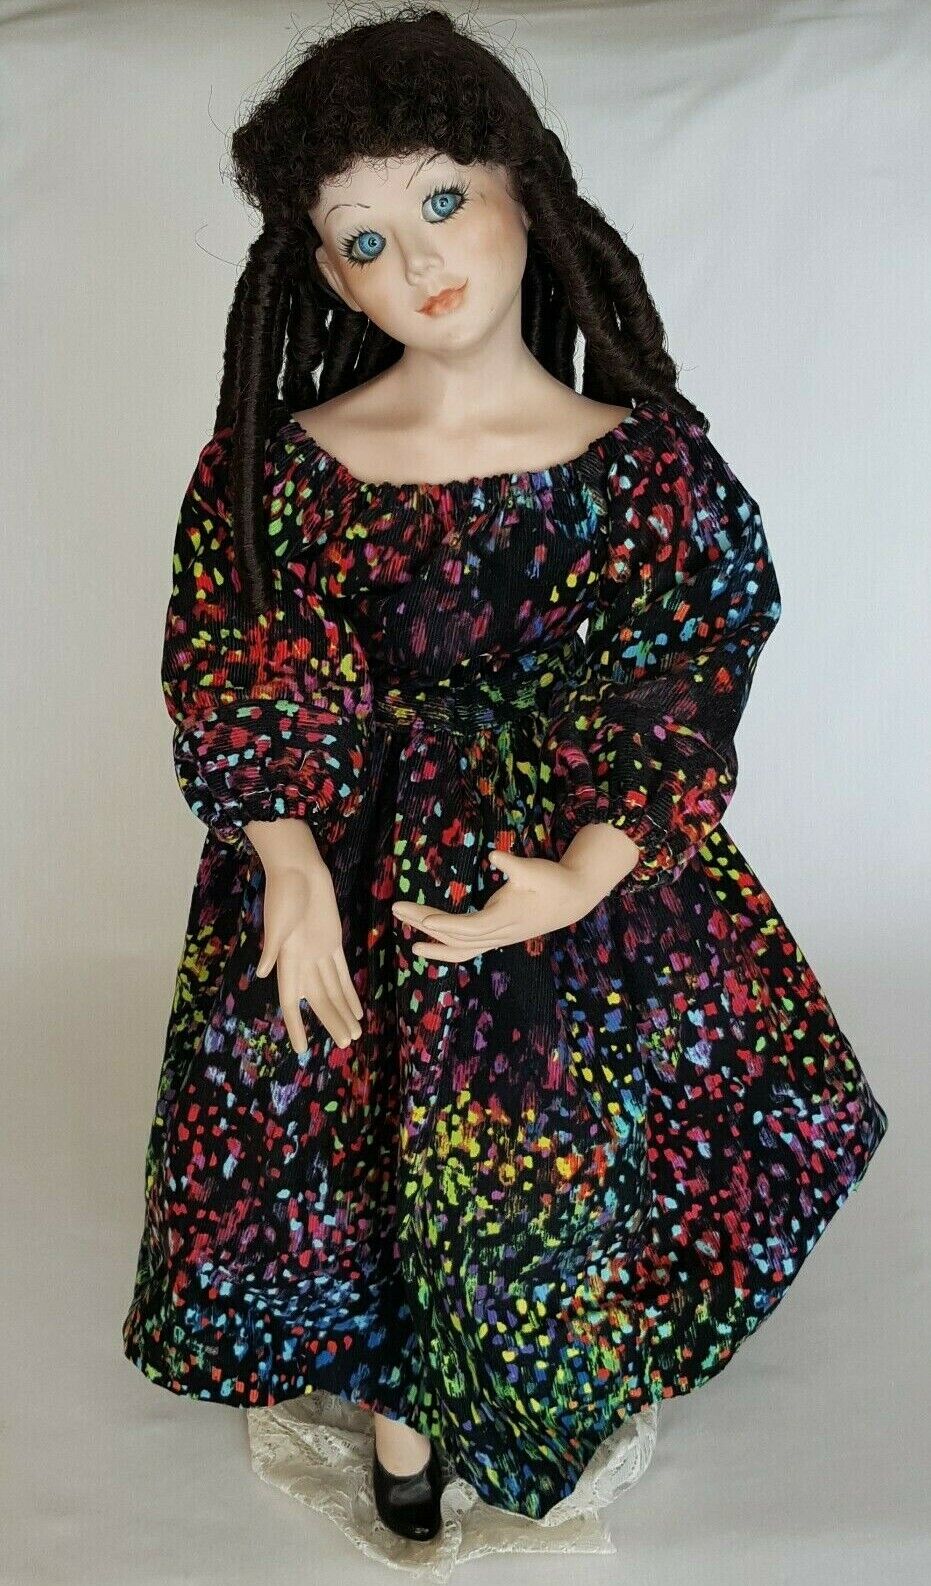 Vintage 1988 Klowns by Kay LG Porcelain Dancing Girl Multicolor Dress w/ Stand